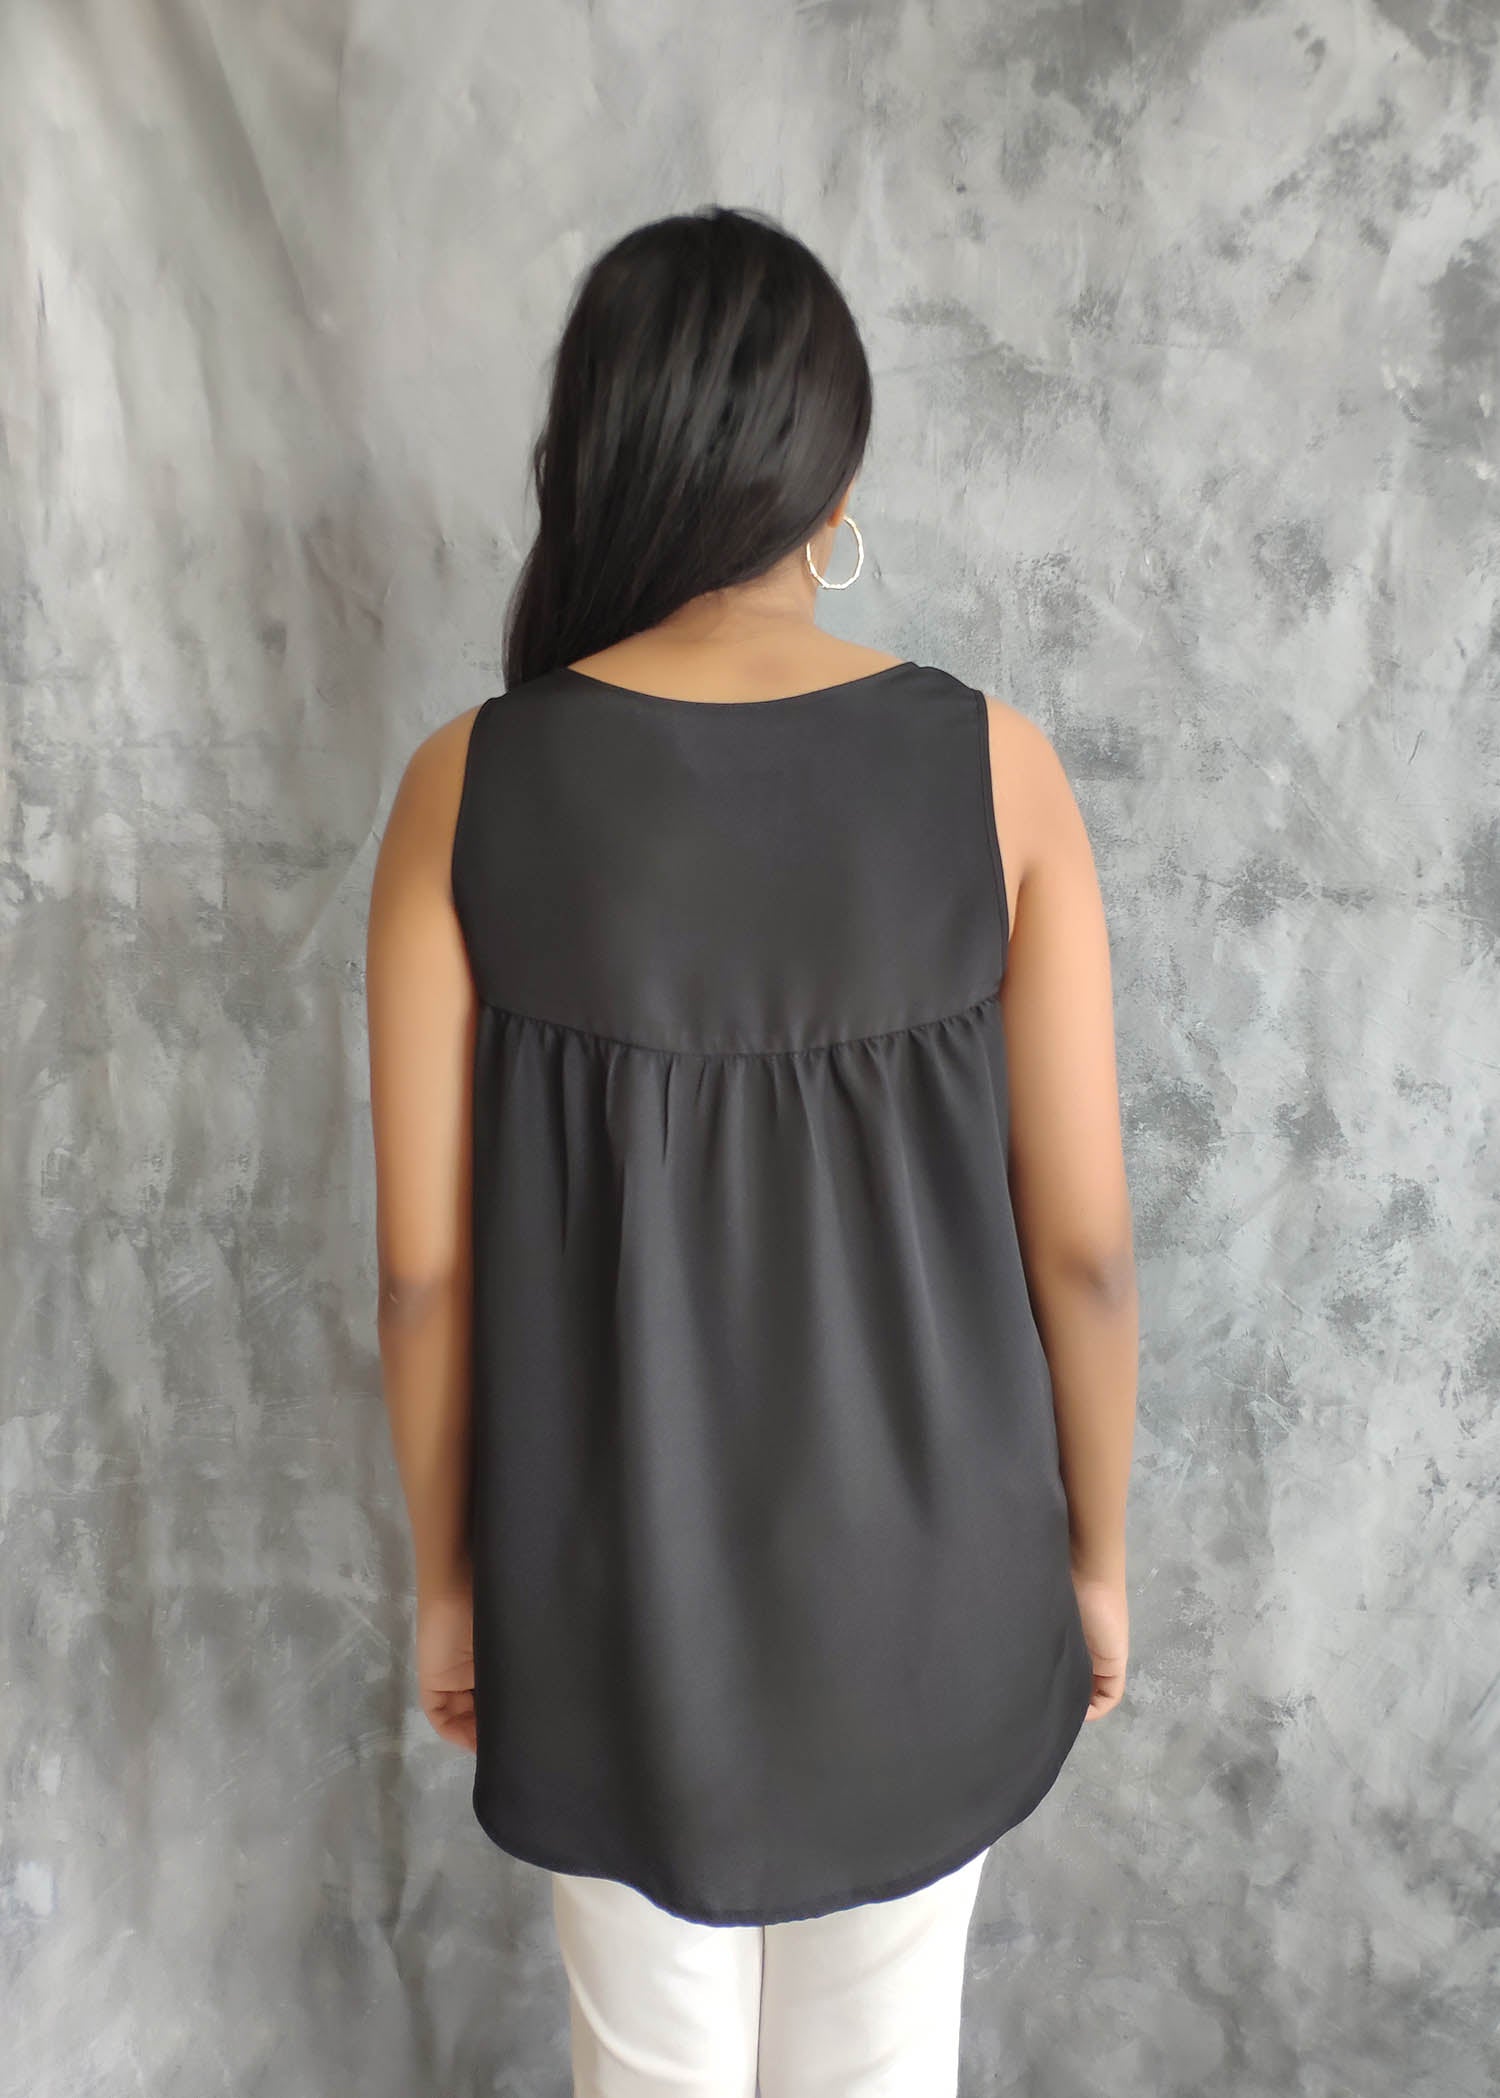 Front Button Opening Sleeveless Top